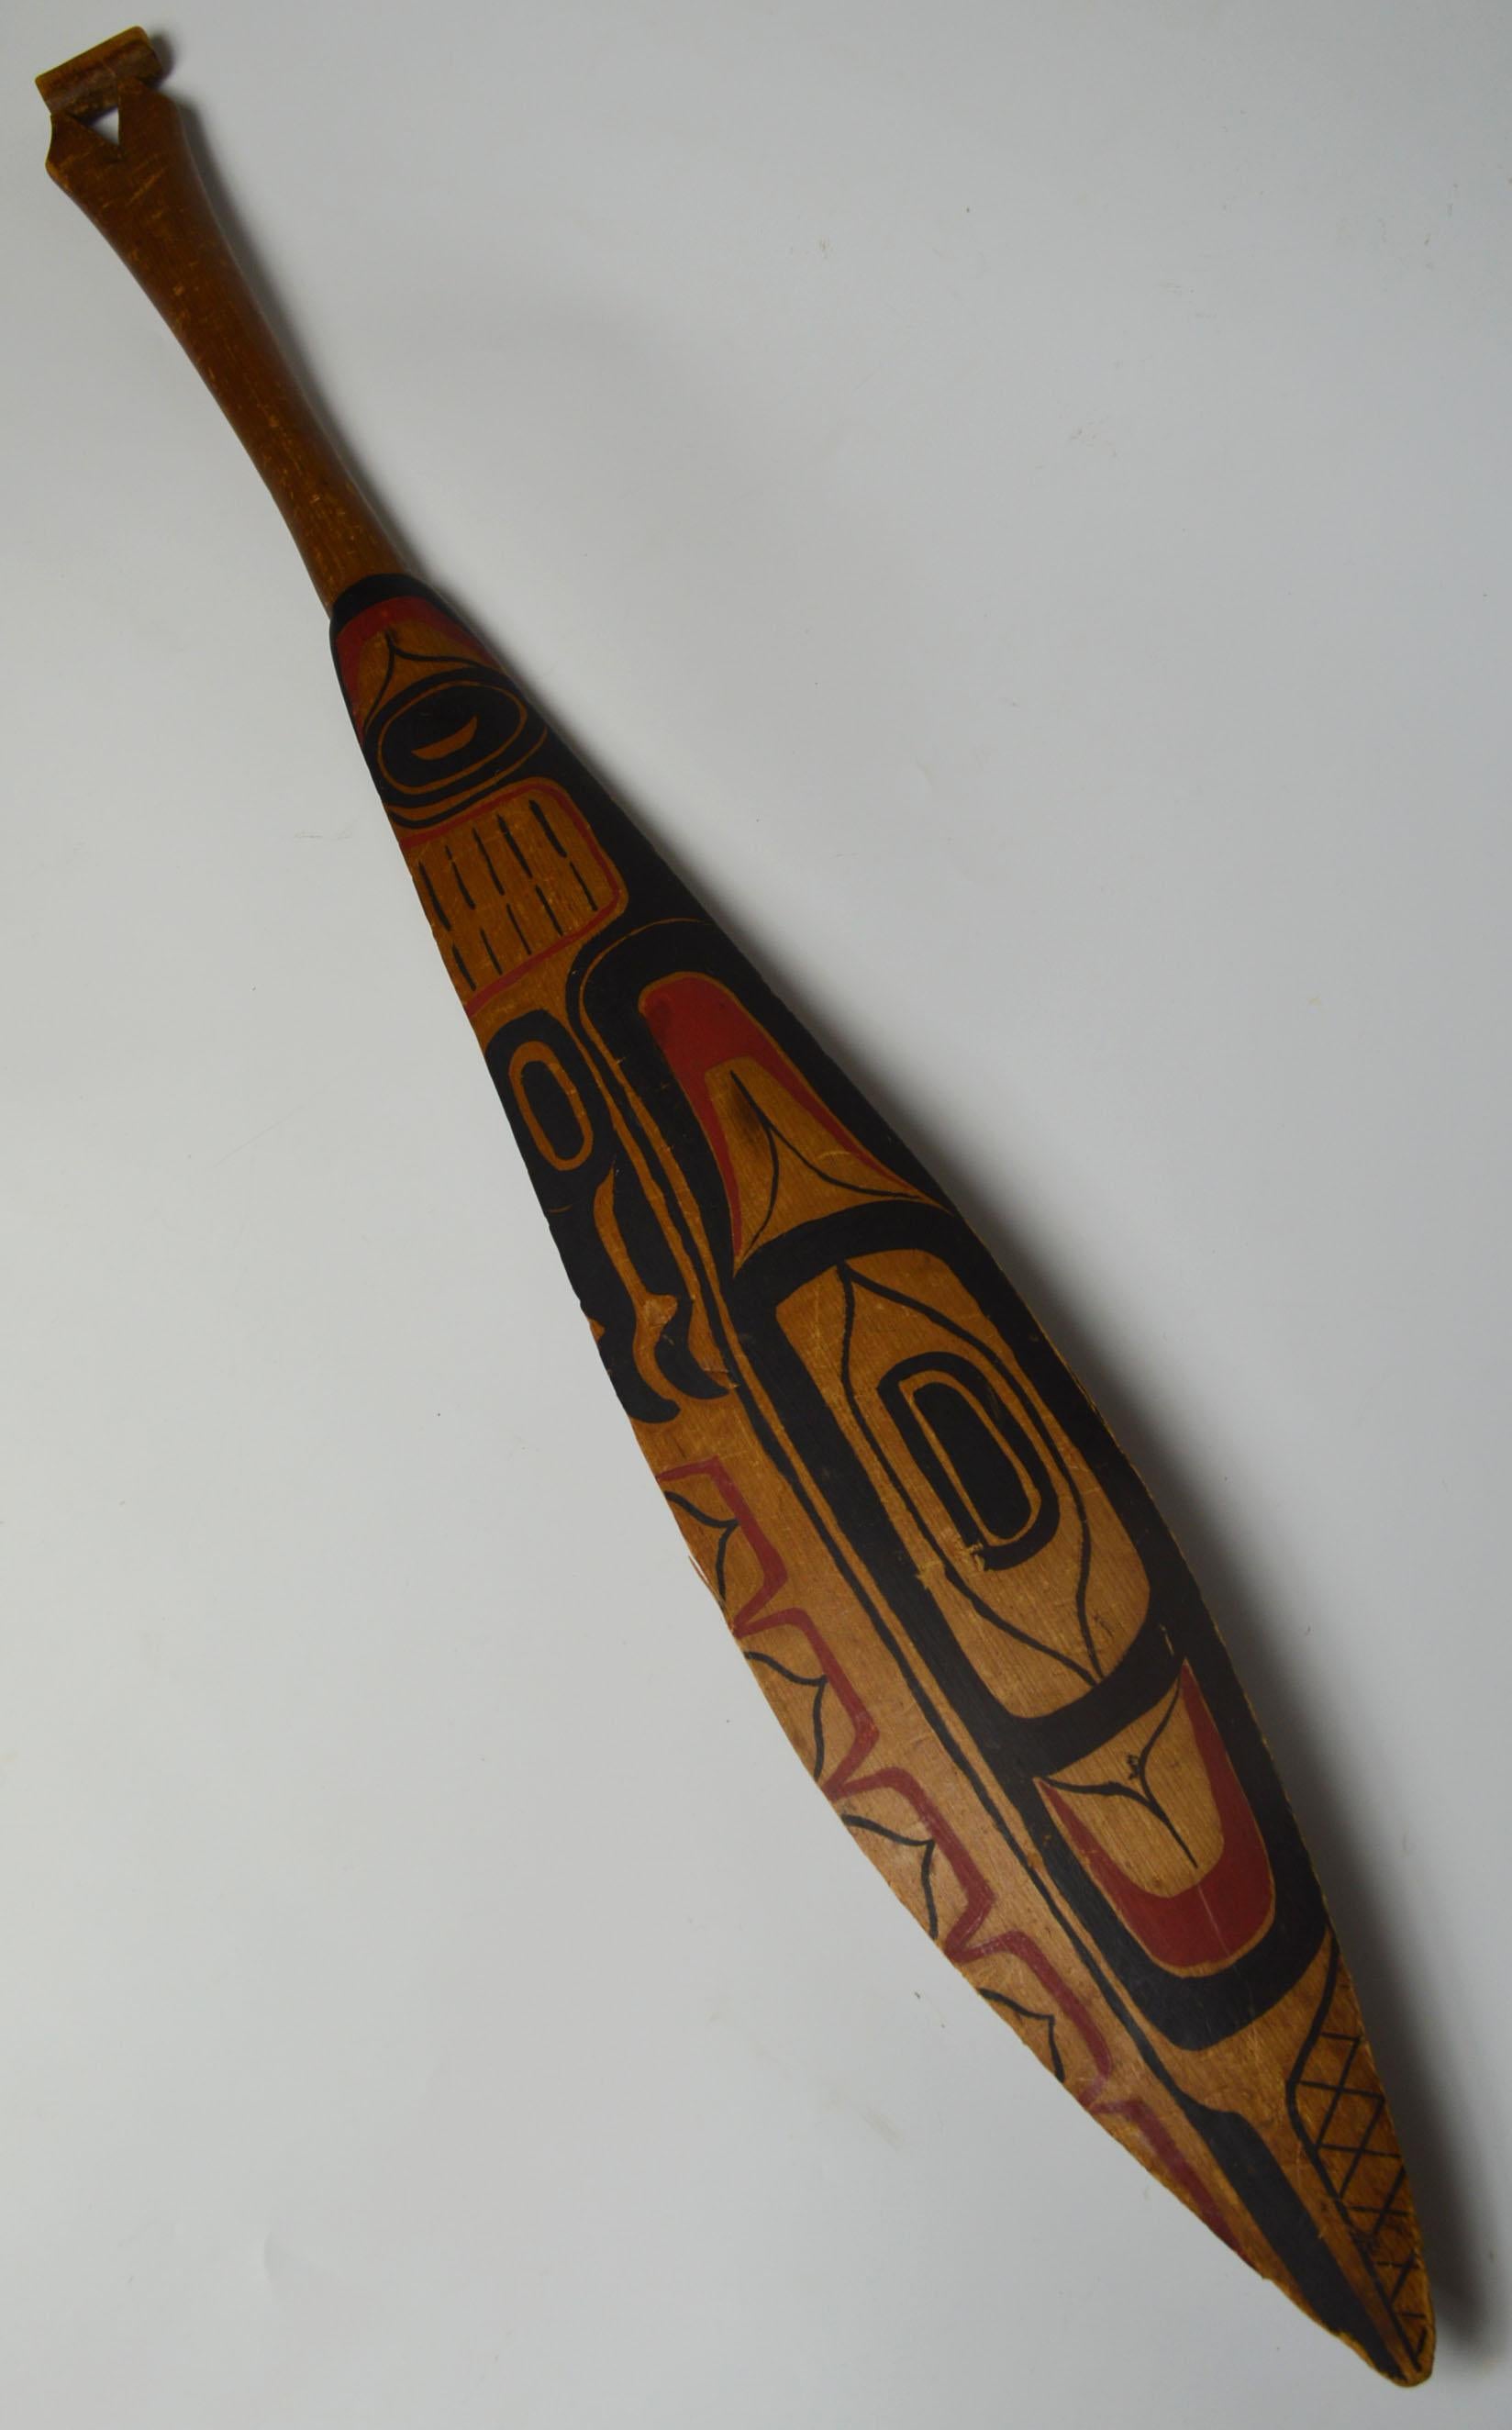 Native American old north west coast painted cedar dance paddle Haida Tlingit
A fine painted cedar dance paddle painted with abstract eagle orca and masked birds designs
Period: circa 1870-1900
Measures: Length 84 cm 33 inches
Condition: